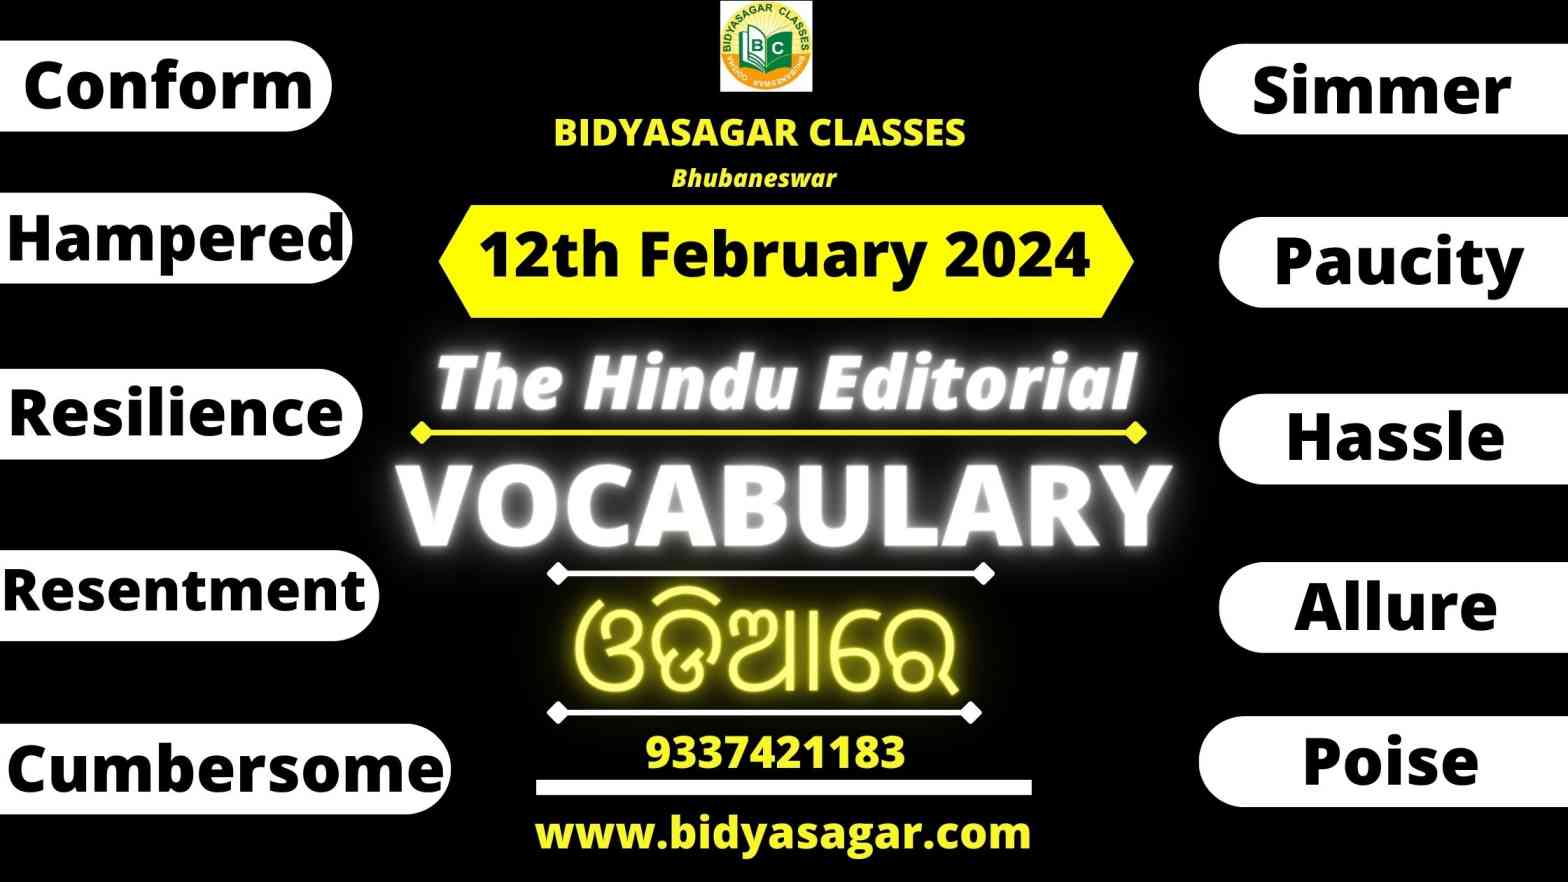 The Hindu Editorial Vocabulary of 12th February 2024